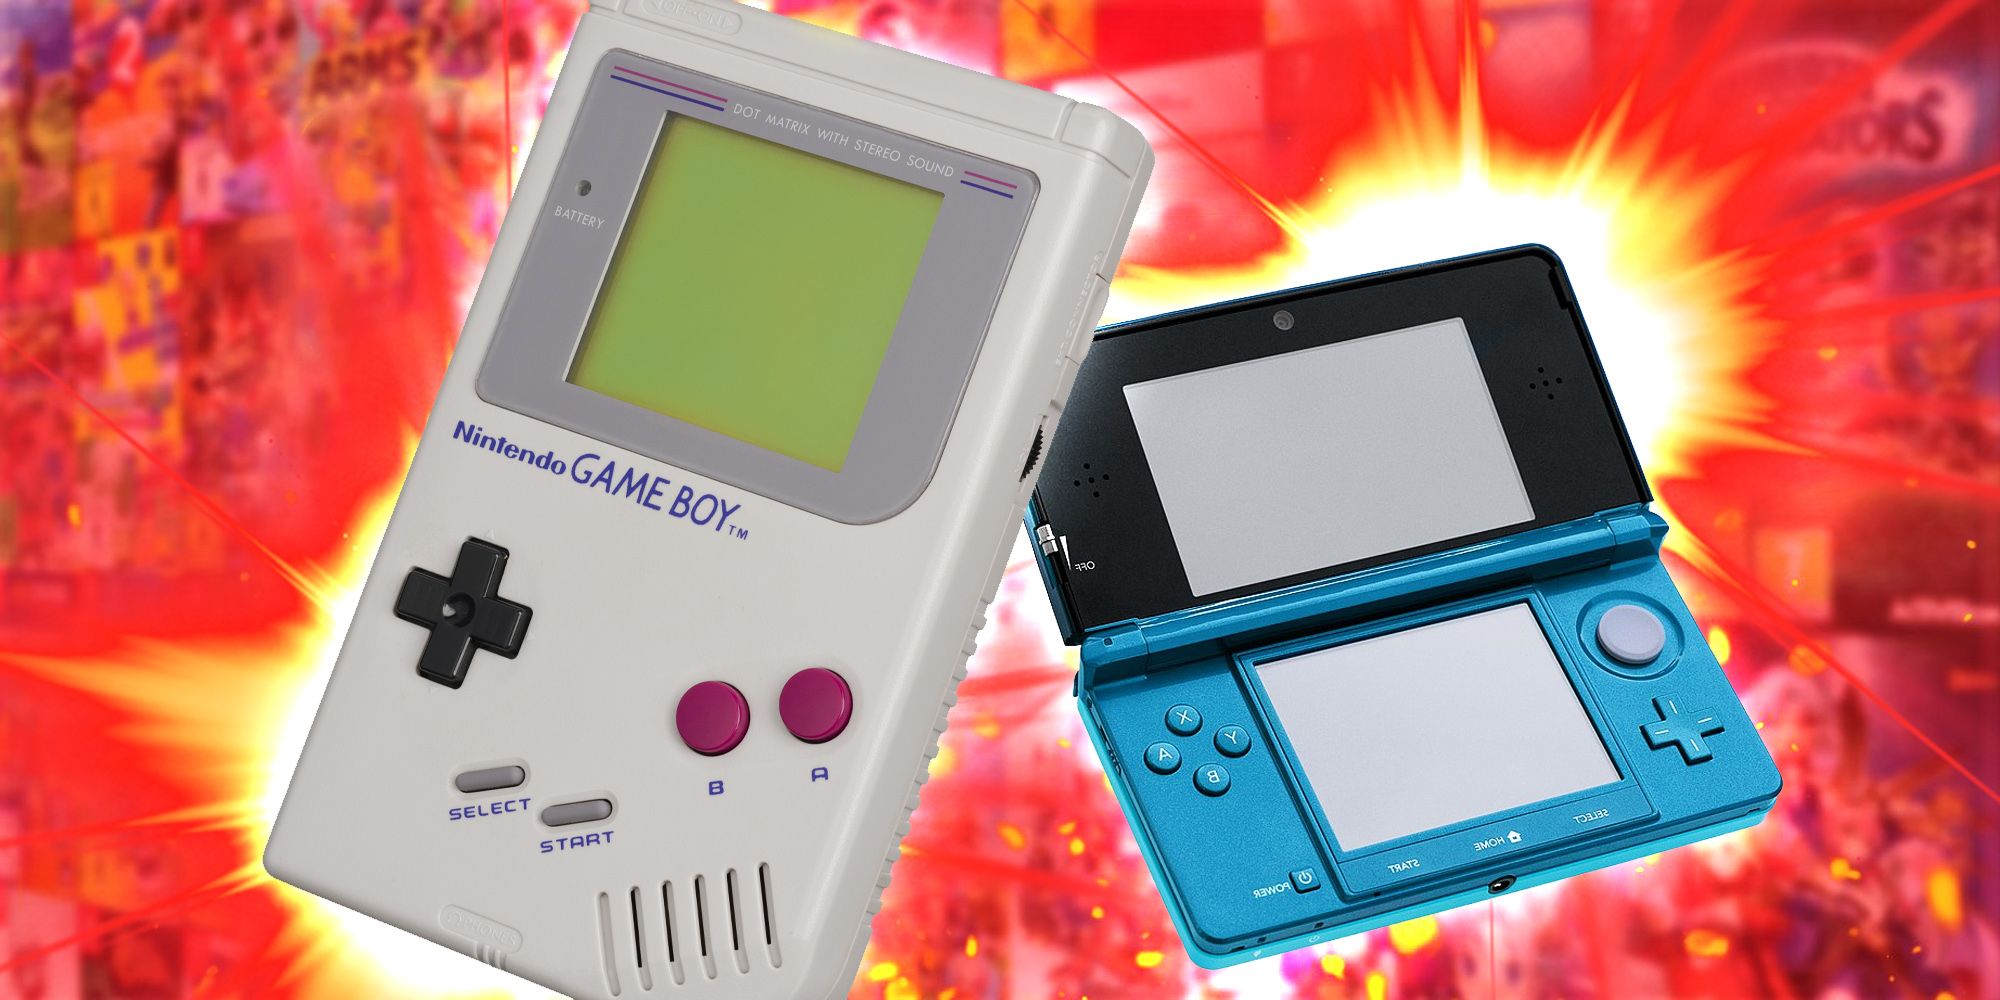 Biggest Game Boy & GBC Games Missing From Nintendo Switch Online